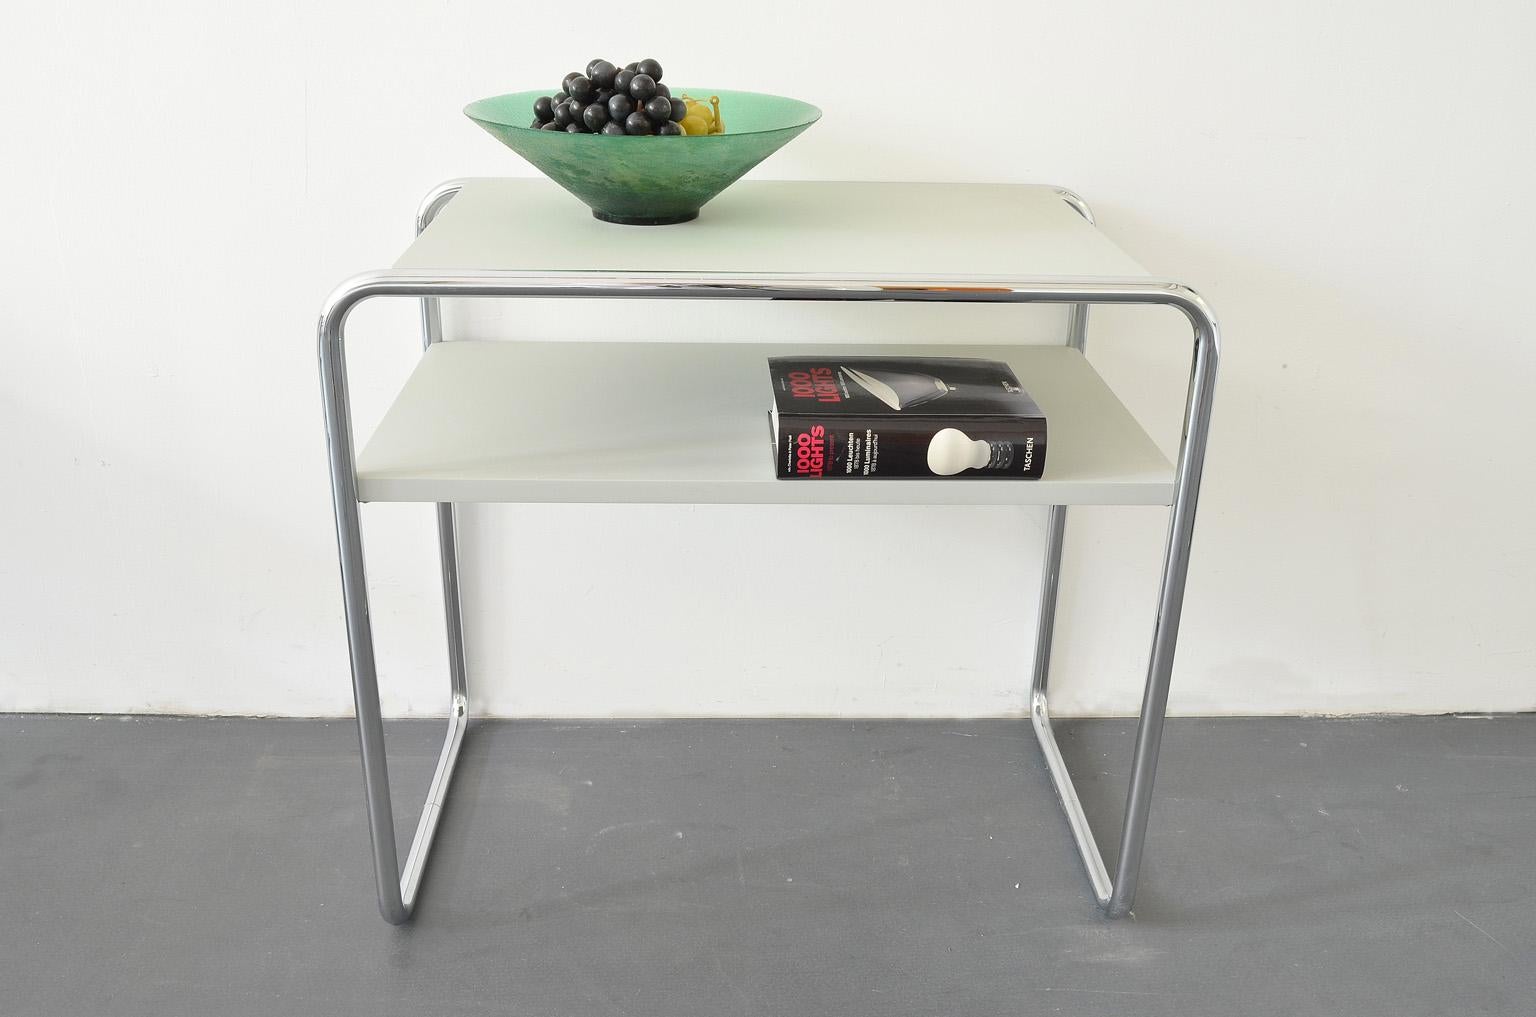 B9d/1 nesting table designed by Marcel Breuer for Thonet, light grey.
B9 nesting table with an additional shelf.

 